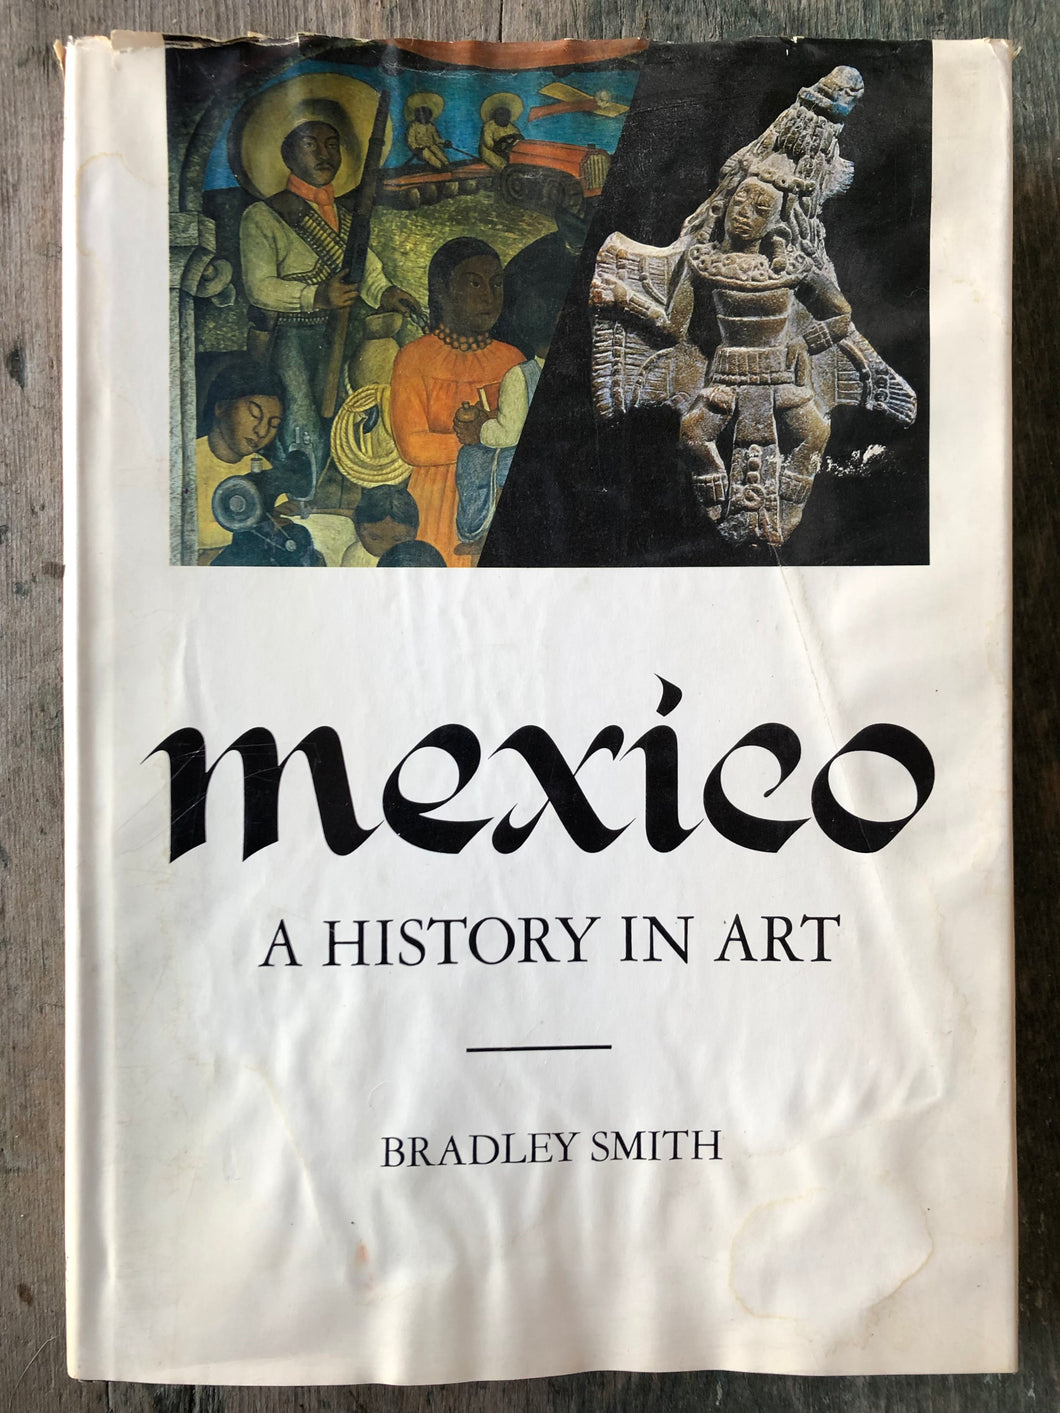 Mexico: A History in Art. By Bradley Smith